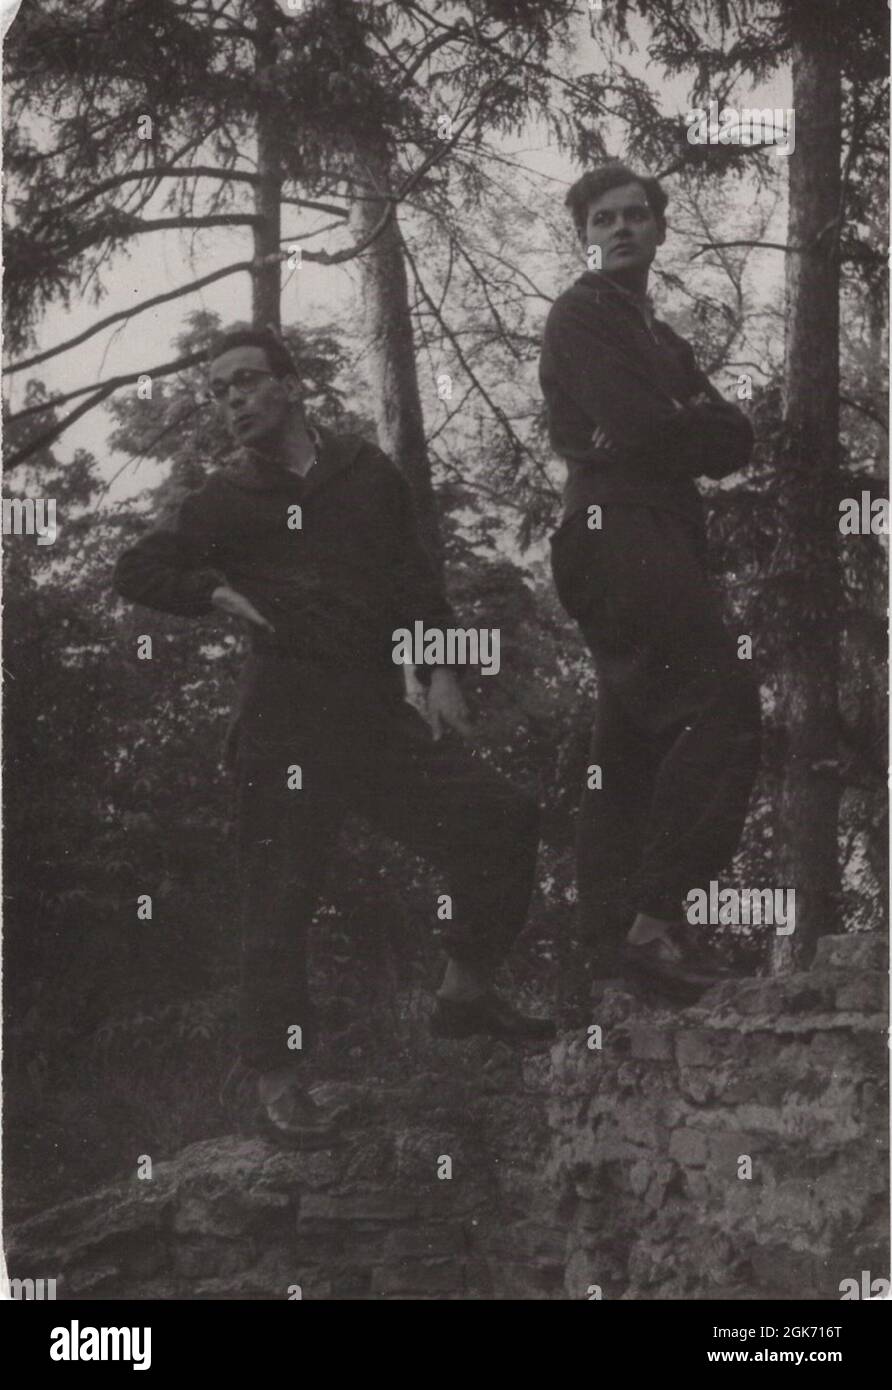 two freinds or brthers went to the wood to posing for the photographer at the 1950's Stock Photo